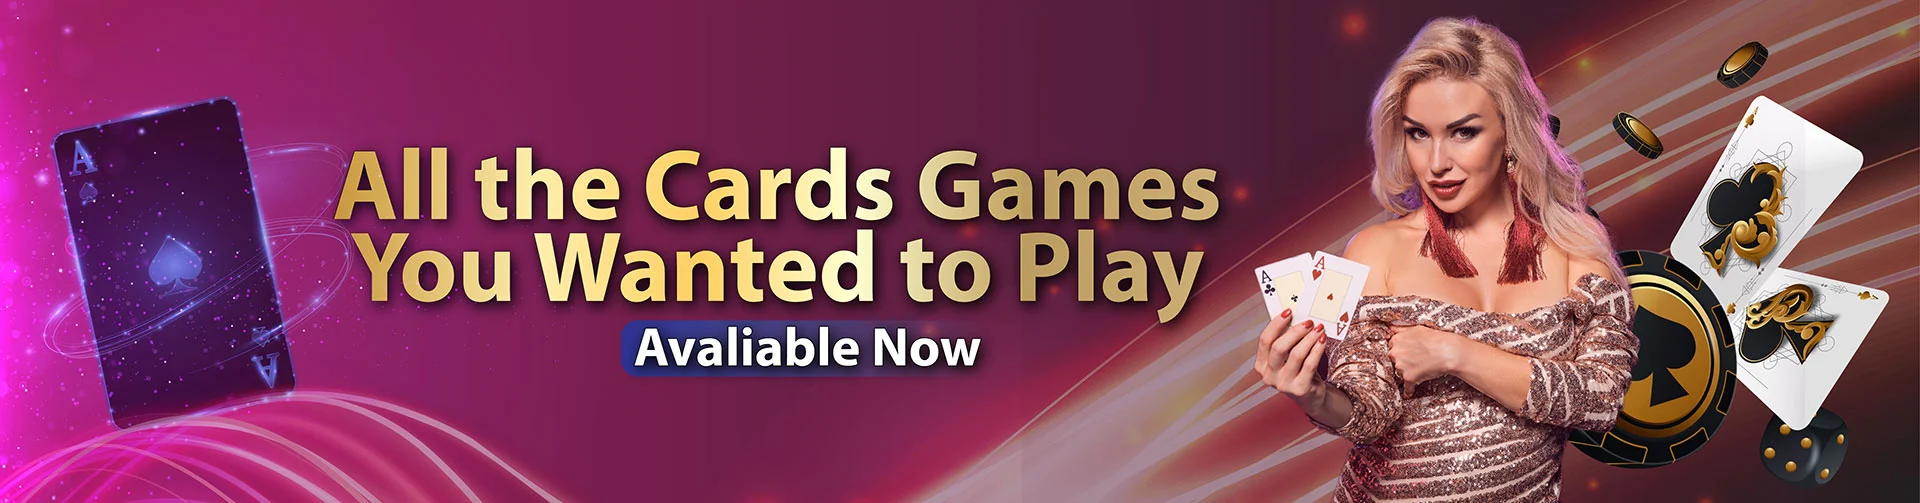 Play Online Card Games to Earn Money